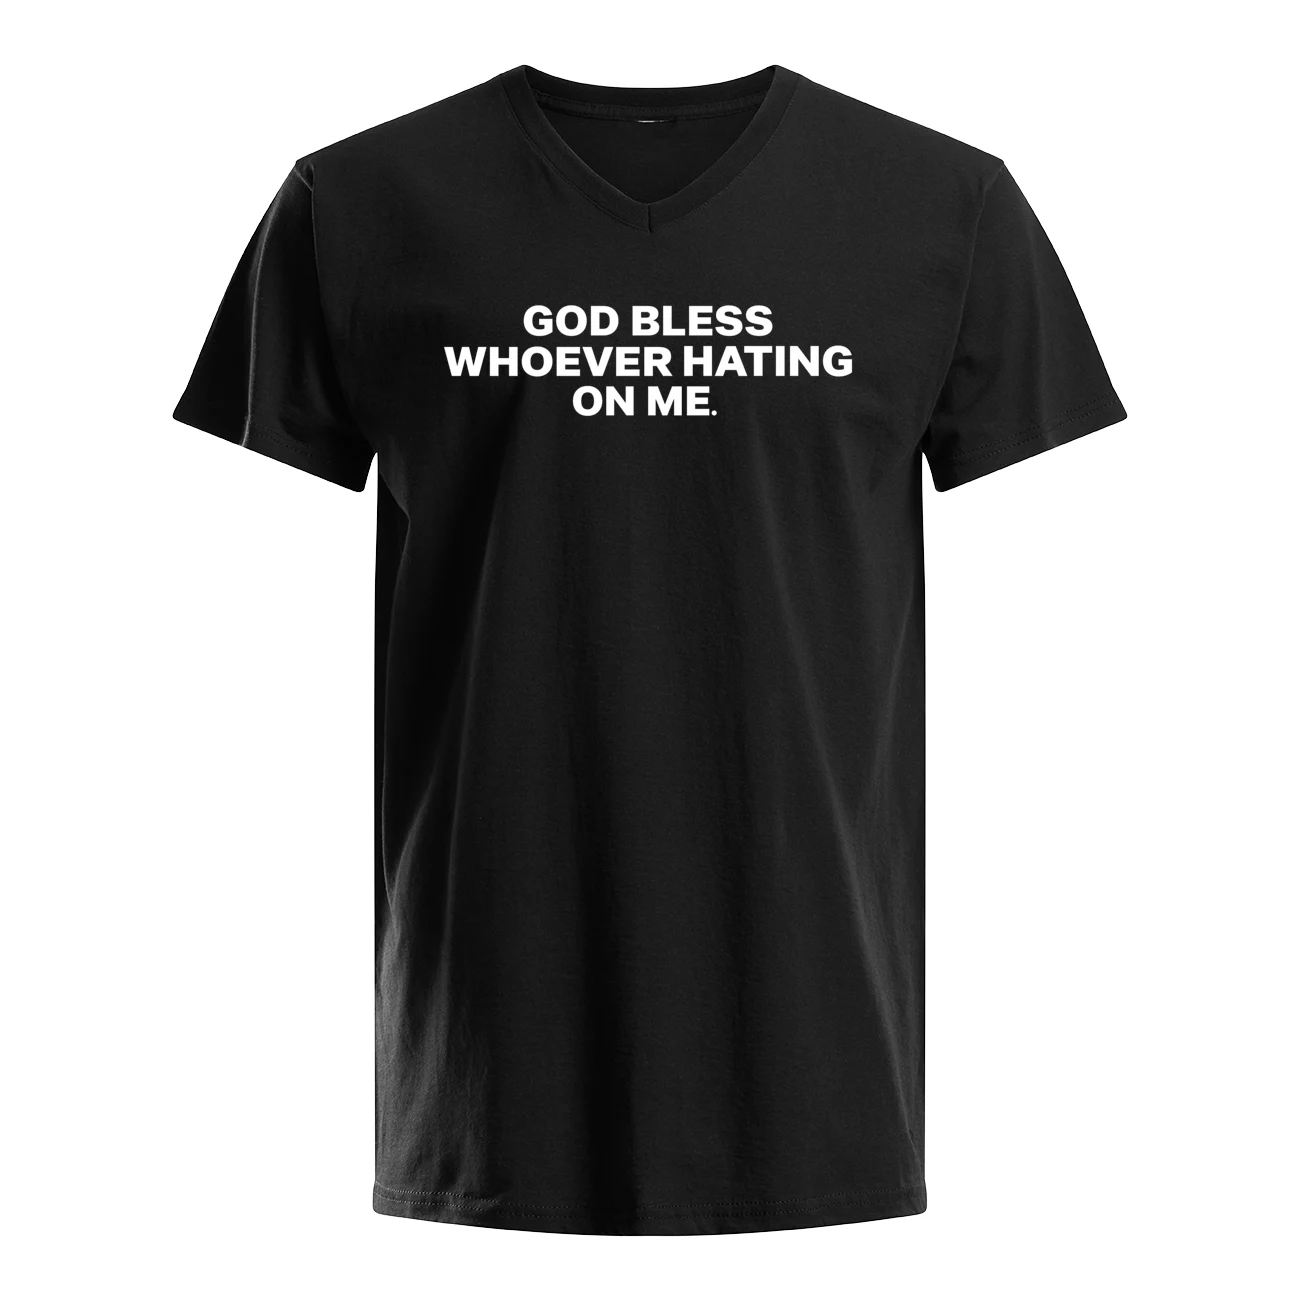 GOD BLESS WHOEVER HATING ON ME SHIRT